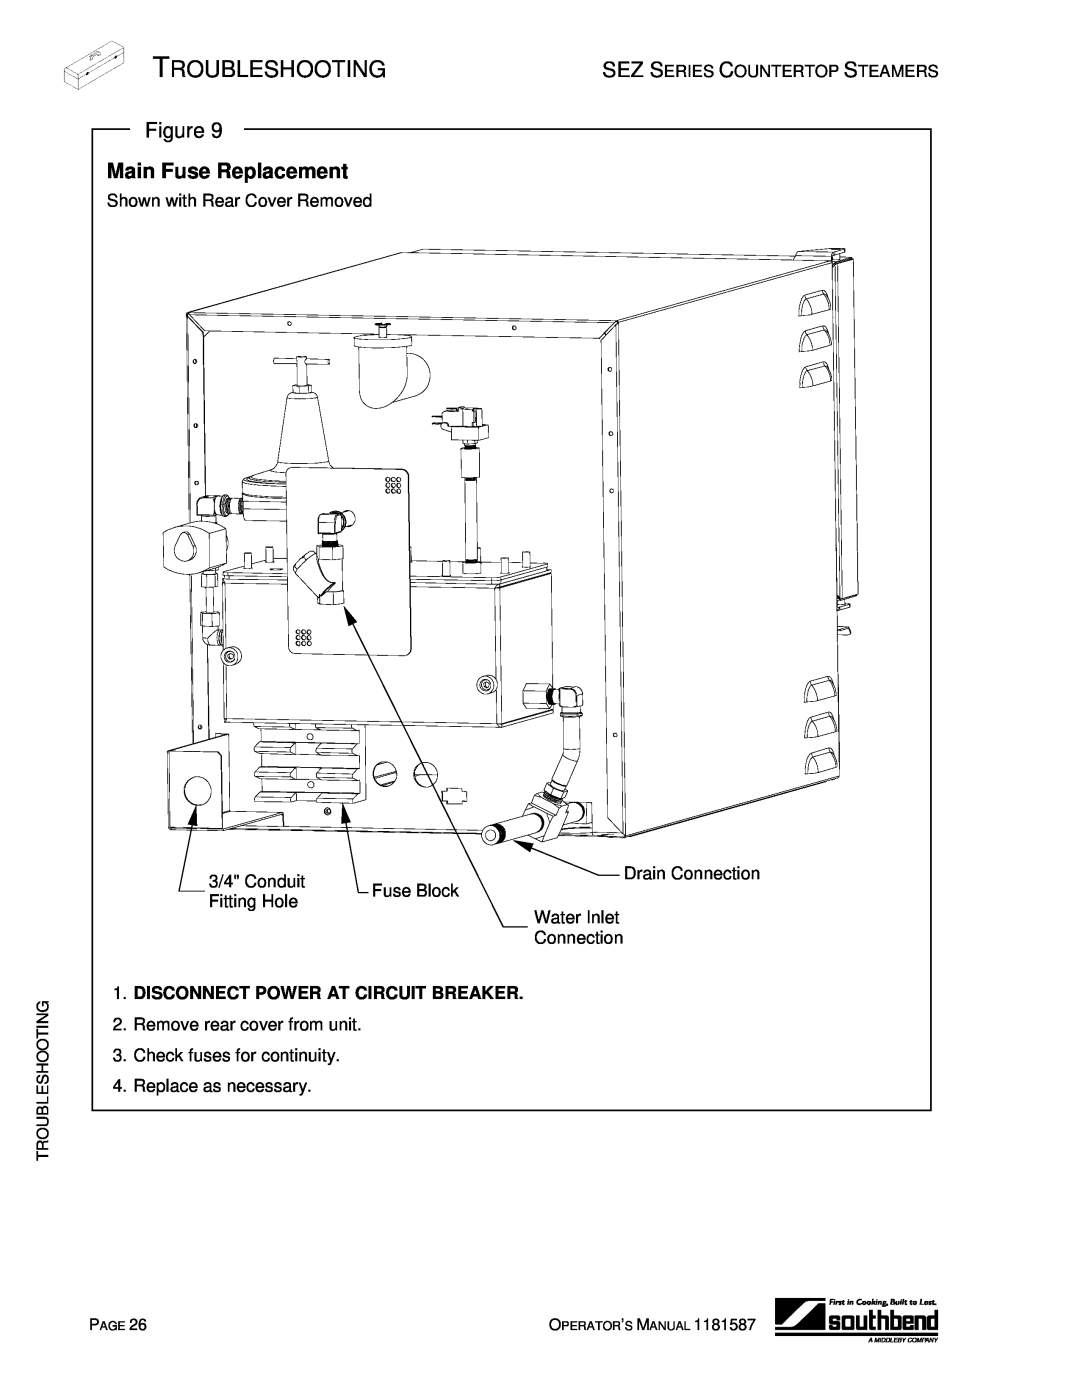 Southbend SEZ-5, SEZ-3 manual Main Fuse Replacement, Troubleshooting, Disconnect Power At Circuit Breaker, Operator’S Manual 